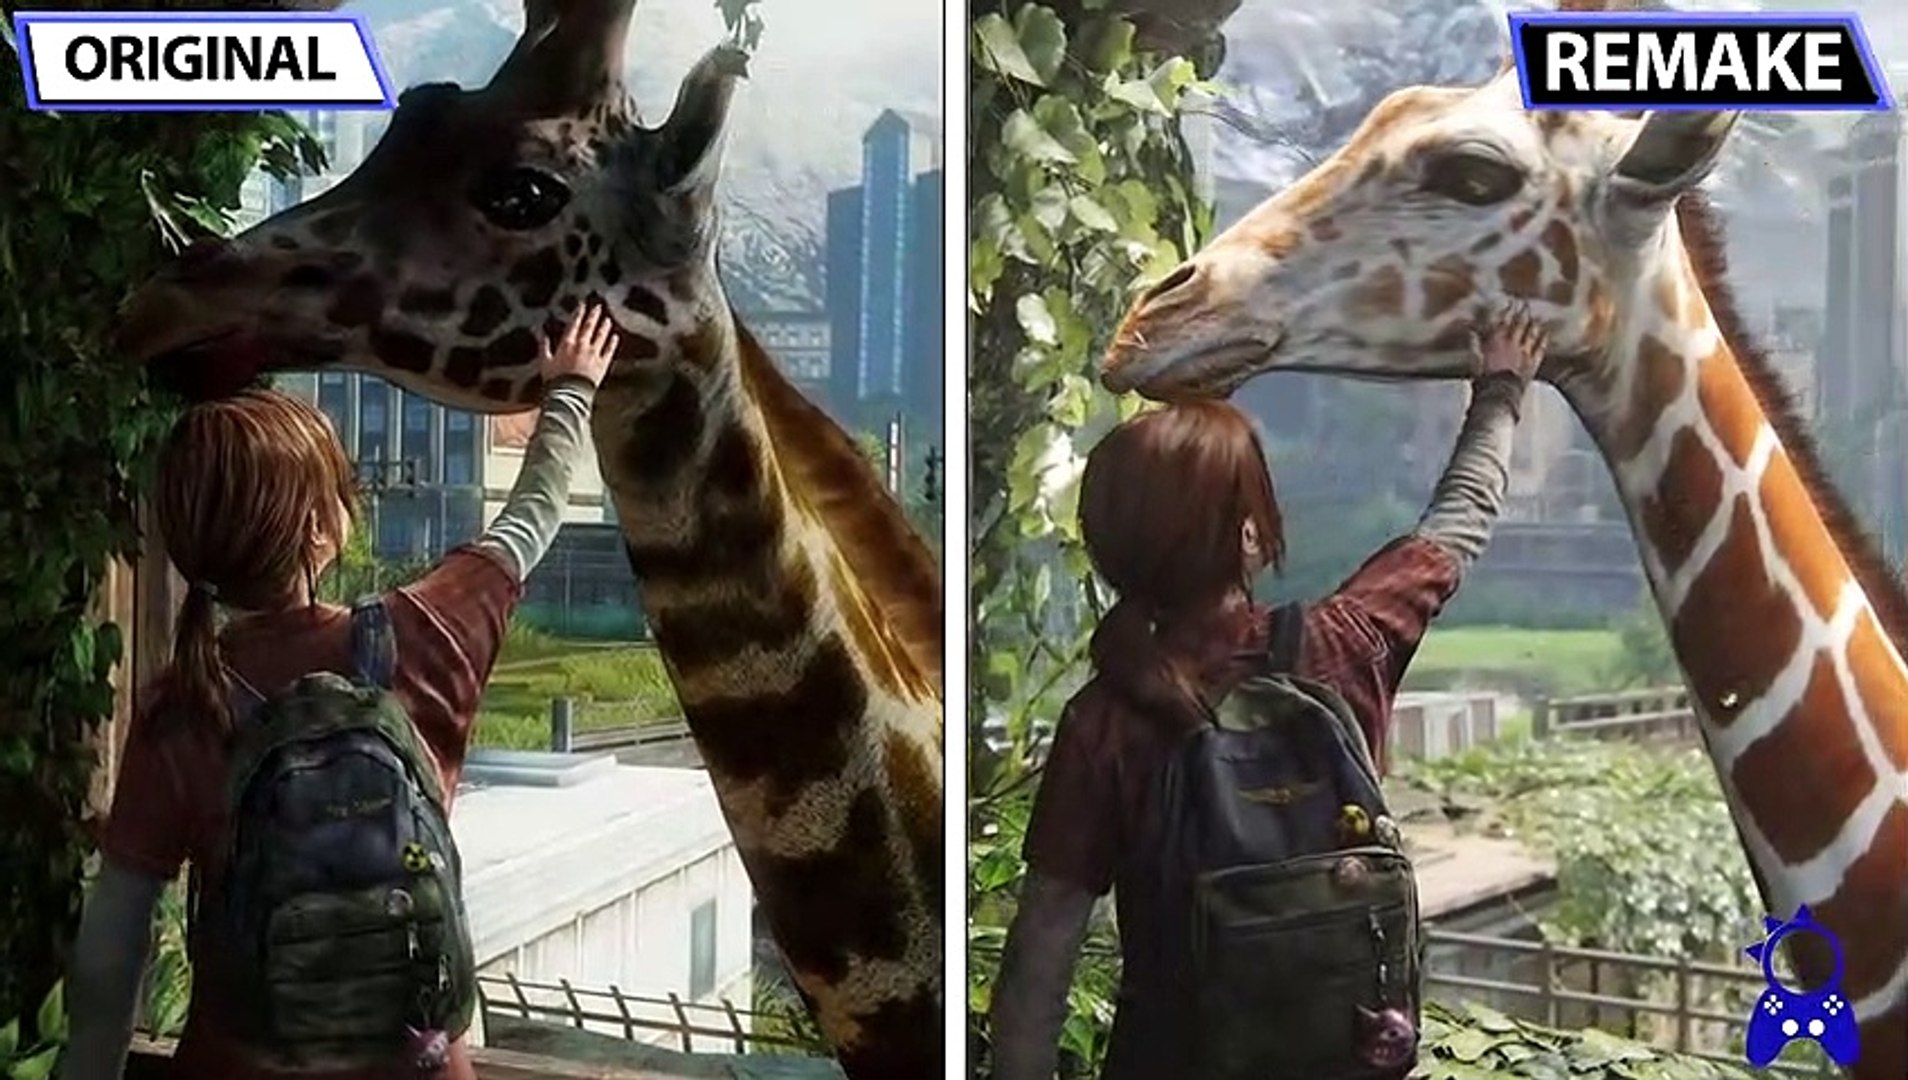 The Last of Us Part 1 (Remake) vs Remastered